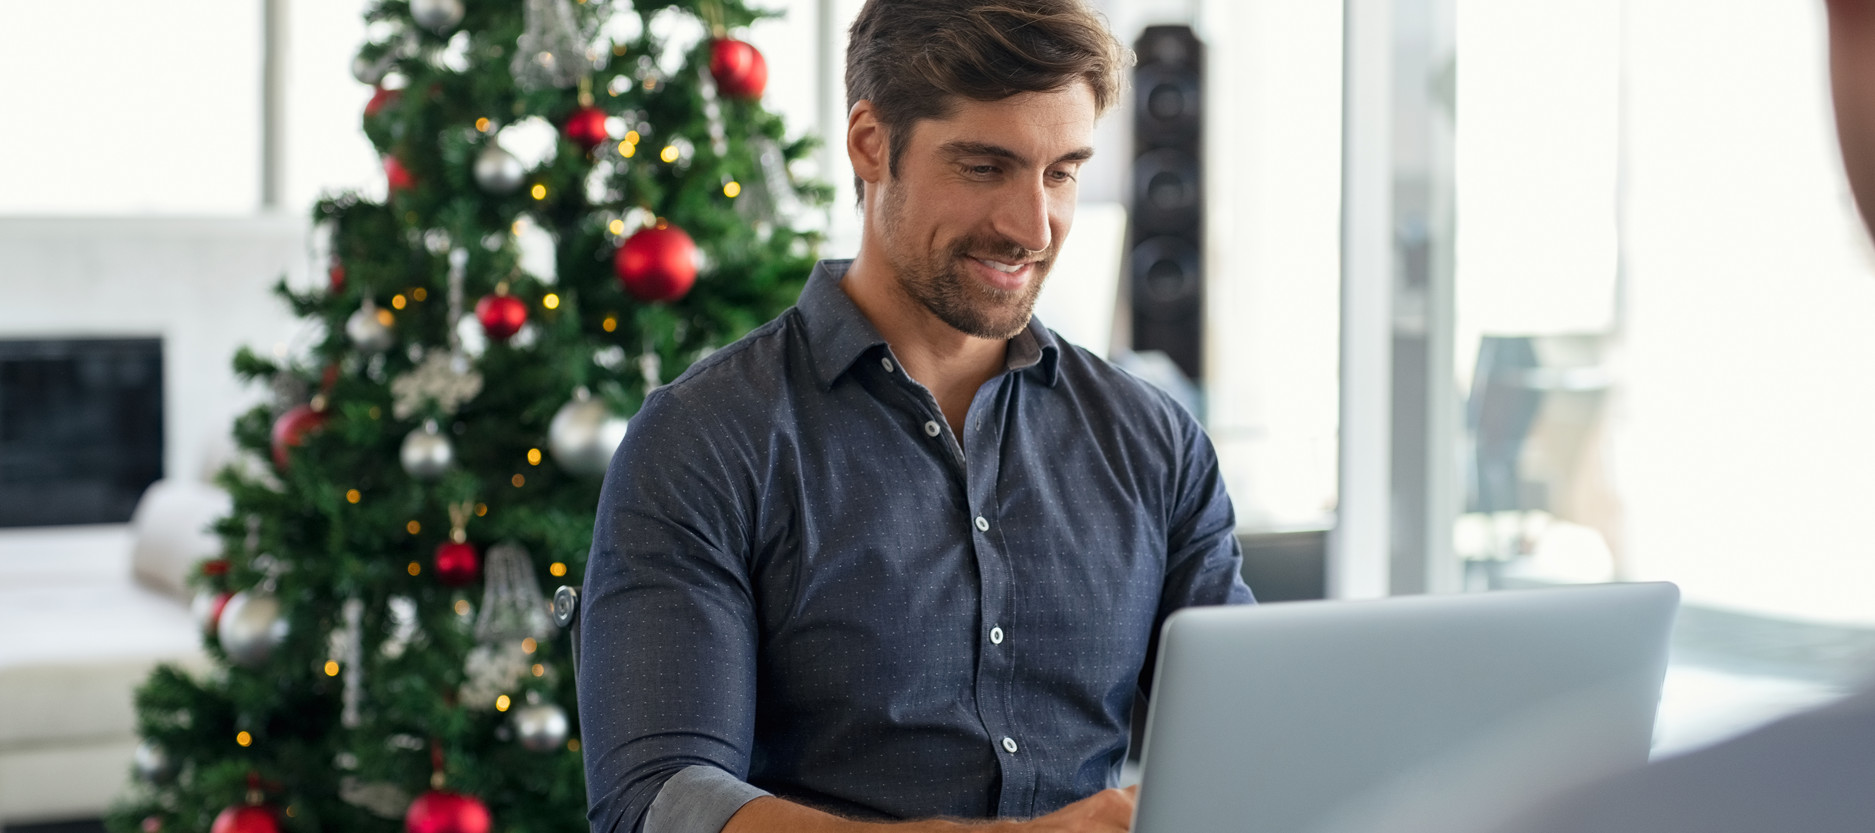 Discover Why Recruiting During The Holidays Is Highly Beneficial